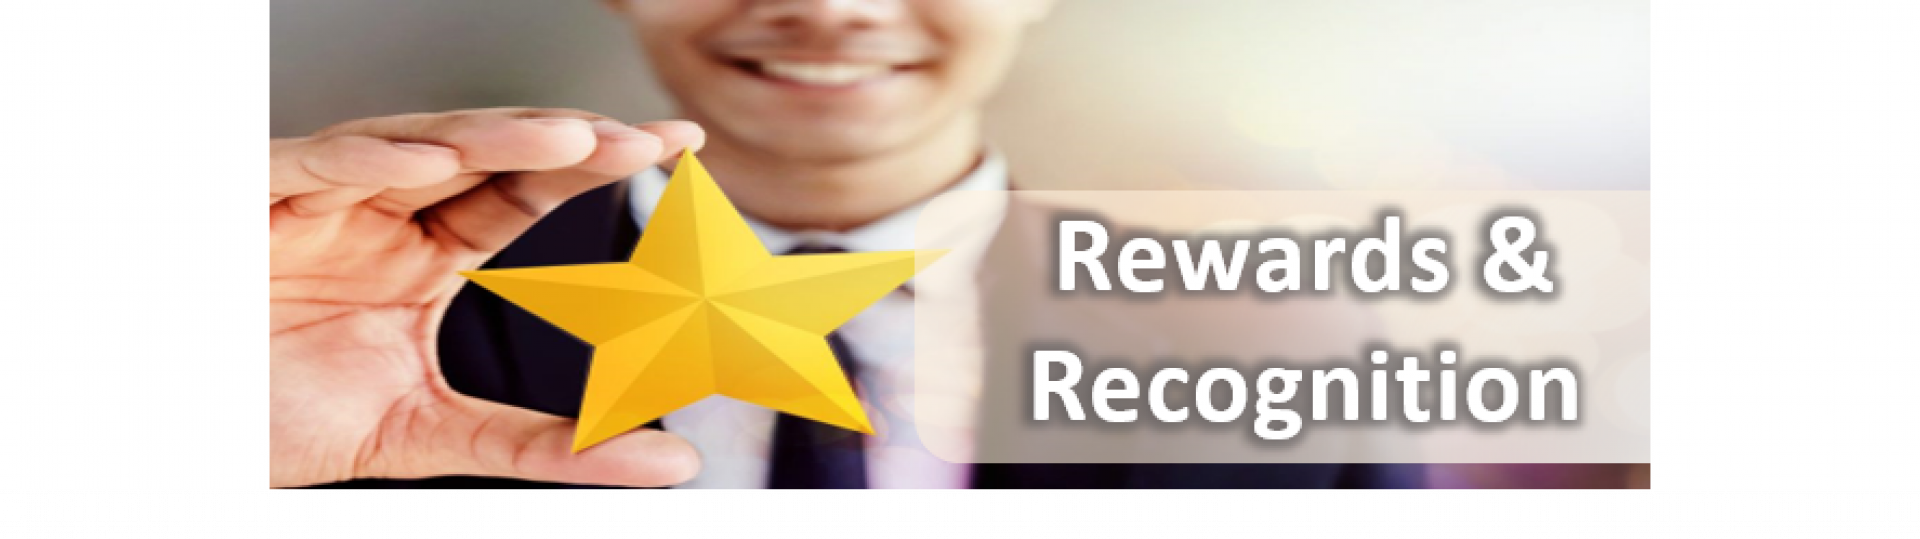 Rewards and Recognition with star